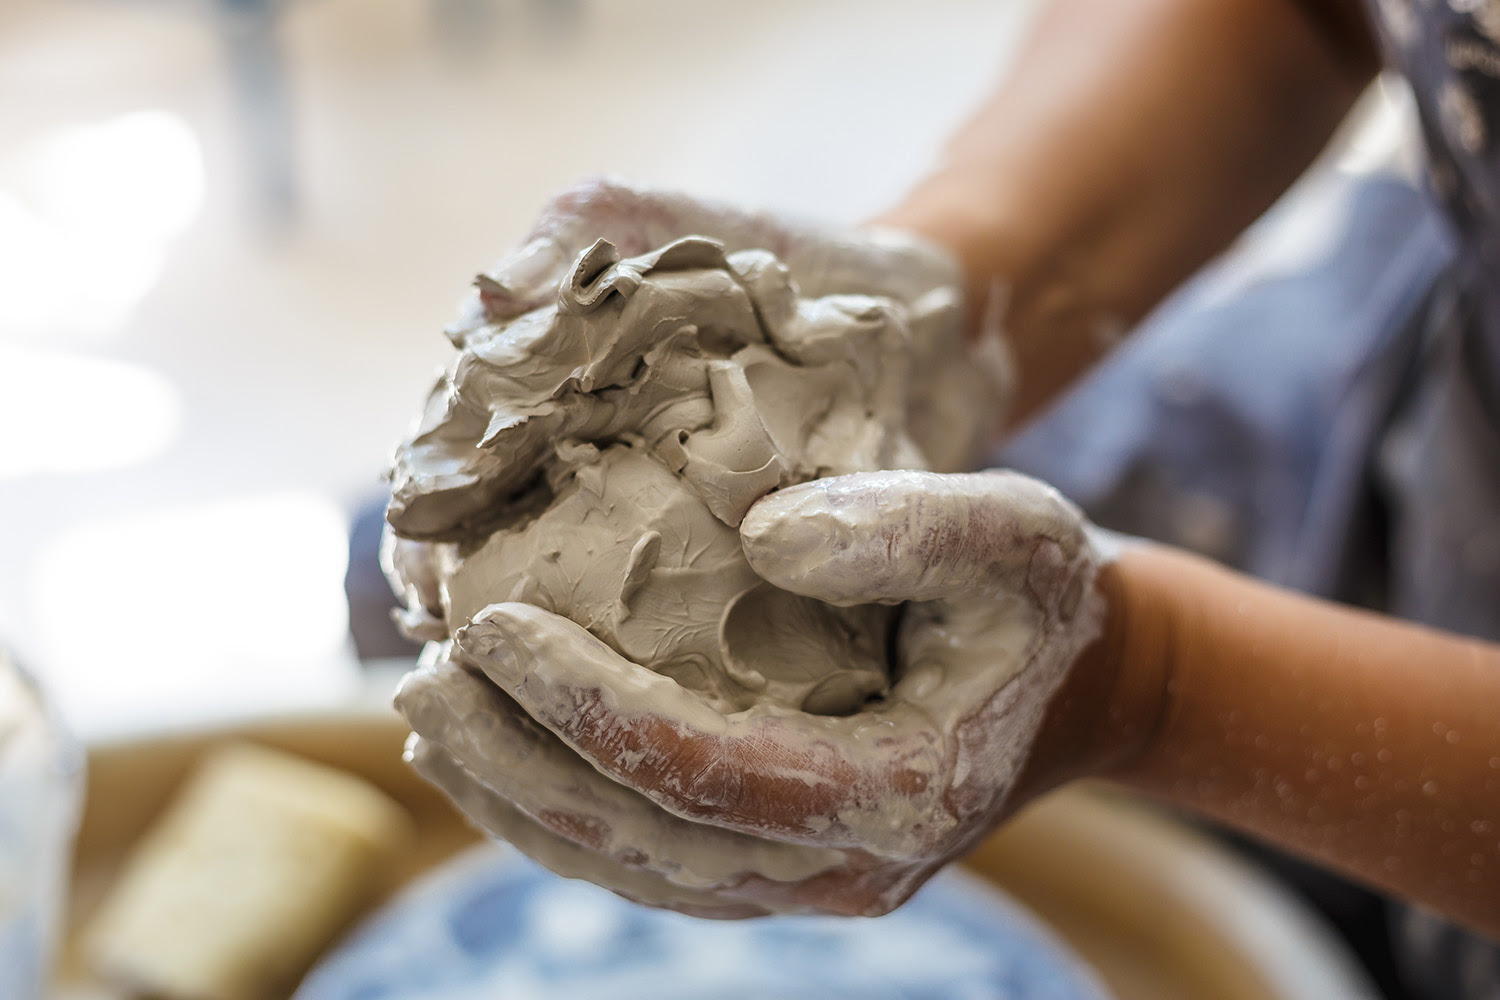 Yom Kippur: "Like Clay in the Hands of the Potter"